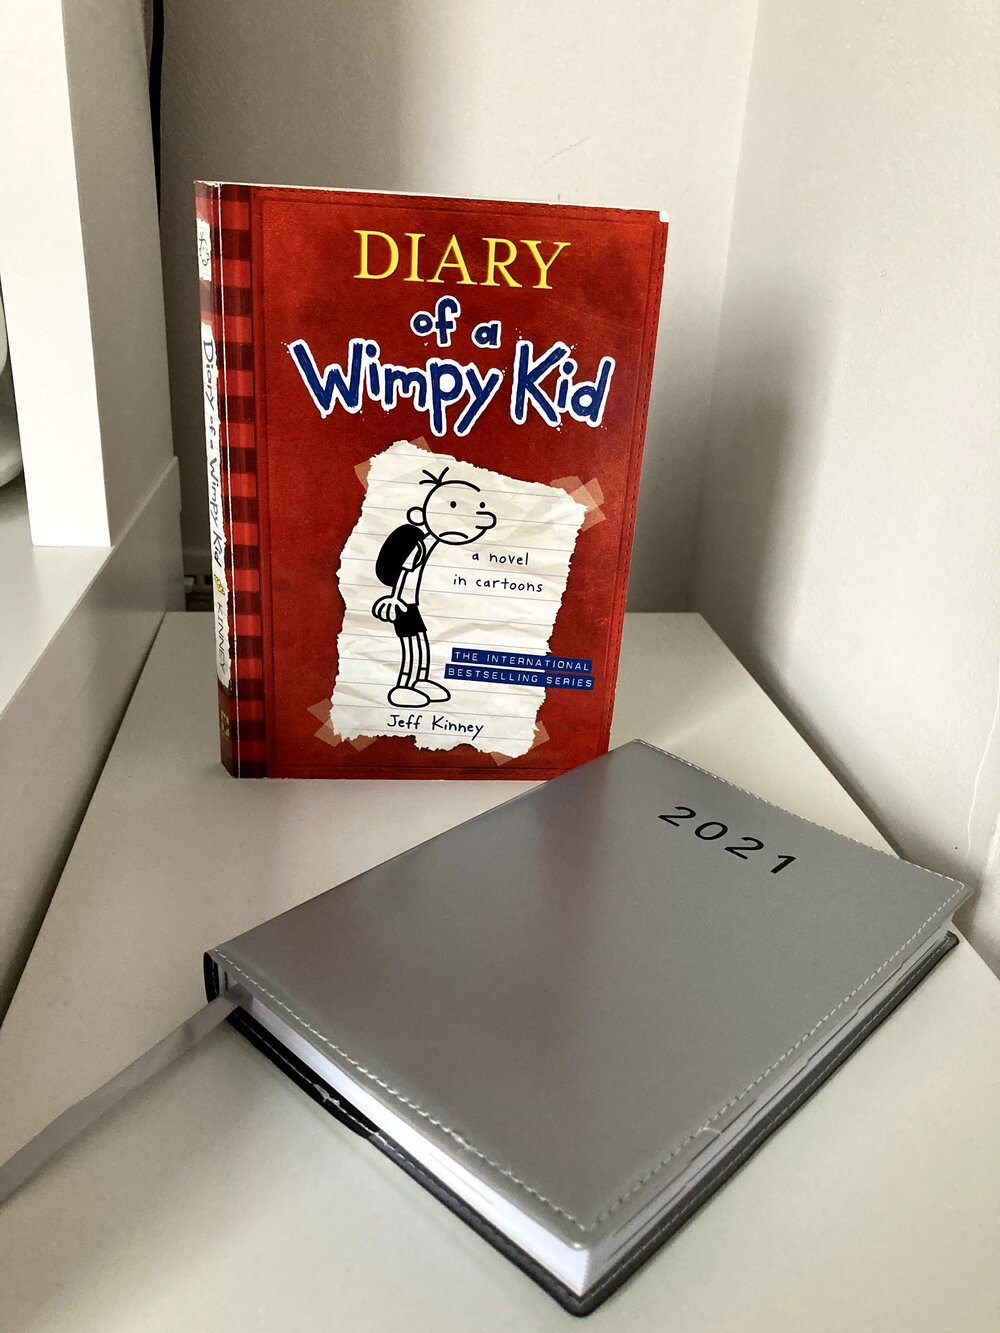 Diary of a Wimpy Kid object - James.jpg